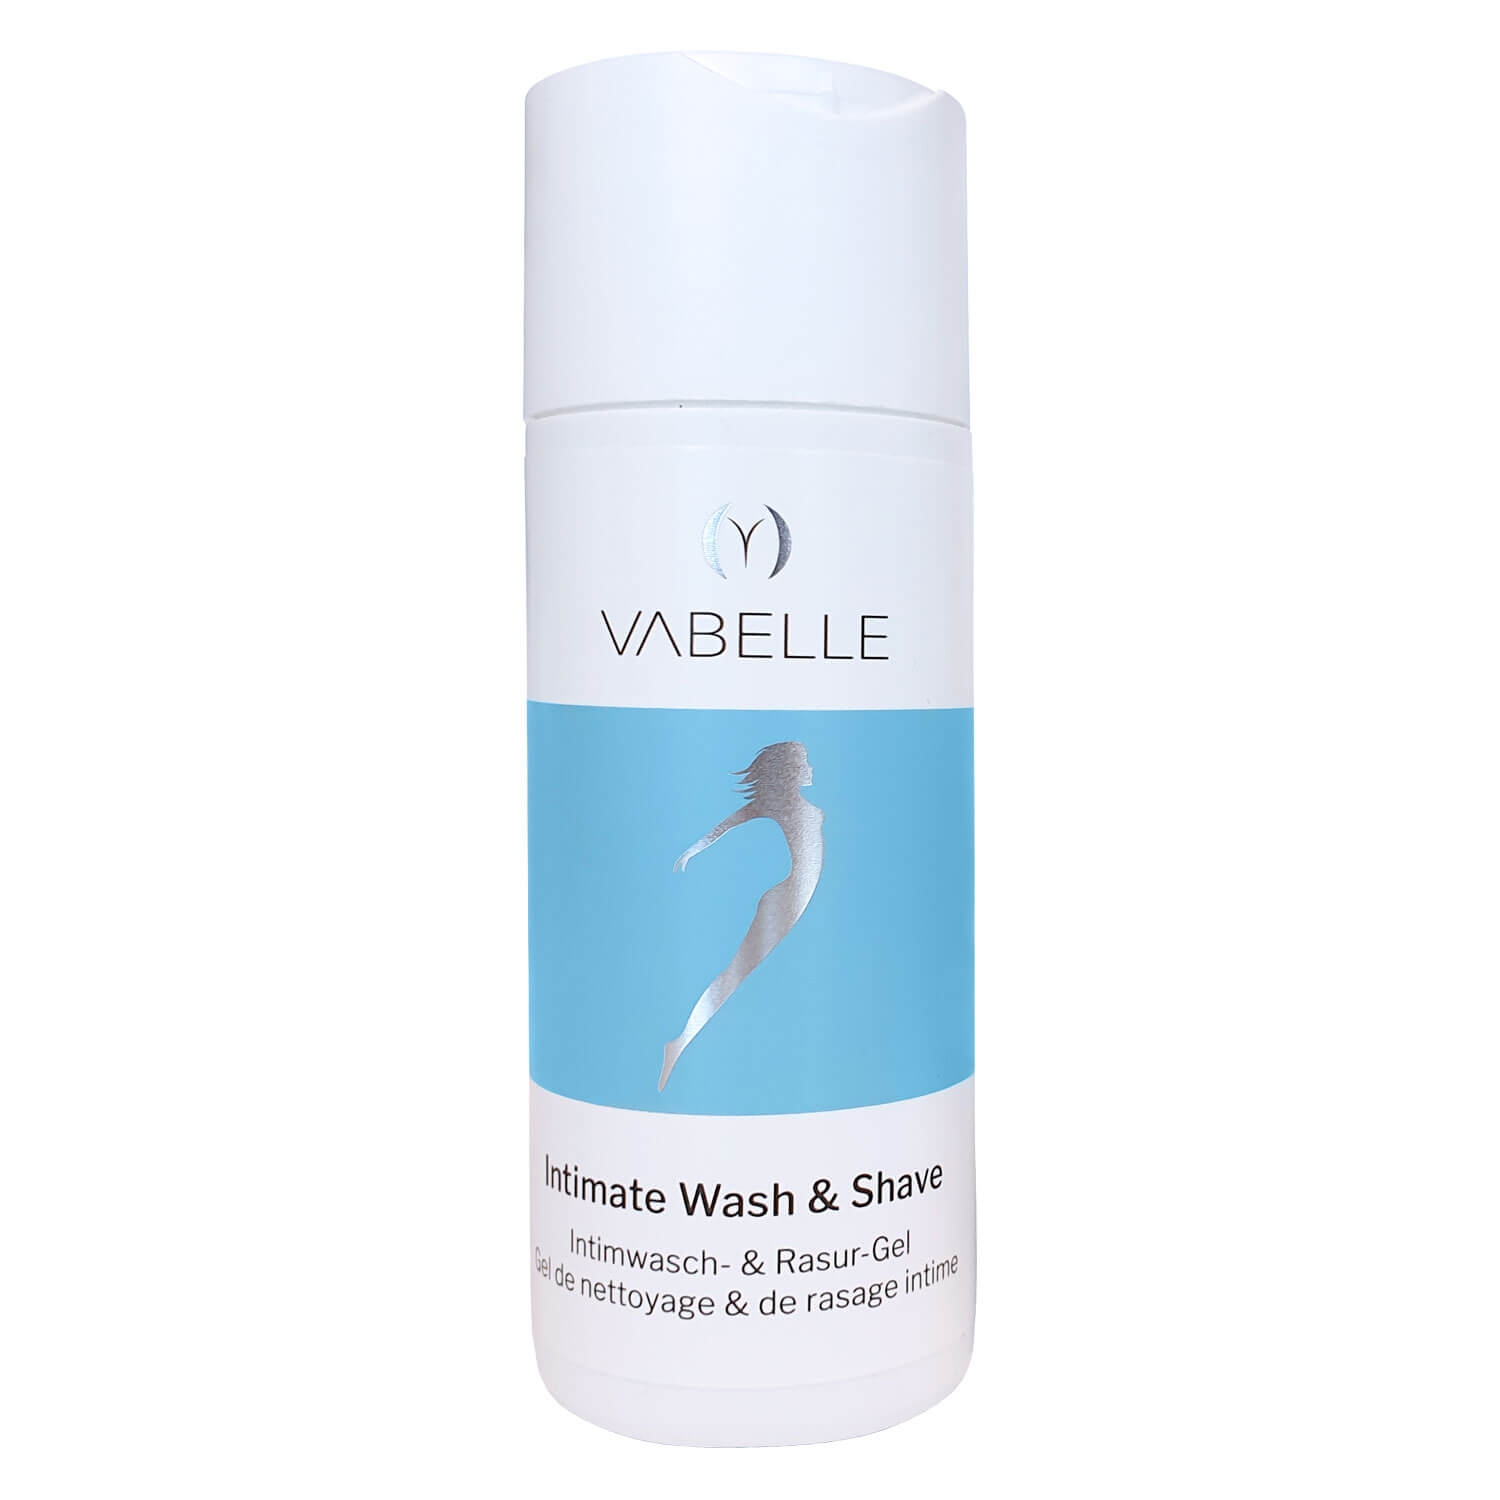 Product image from Vabelle - Intimate Wash & Shave